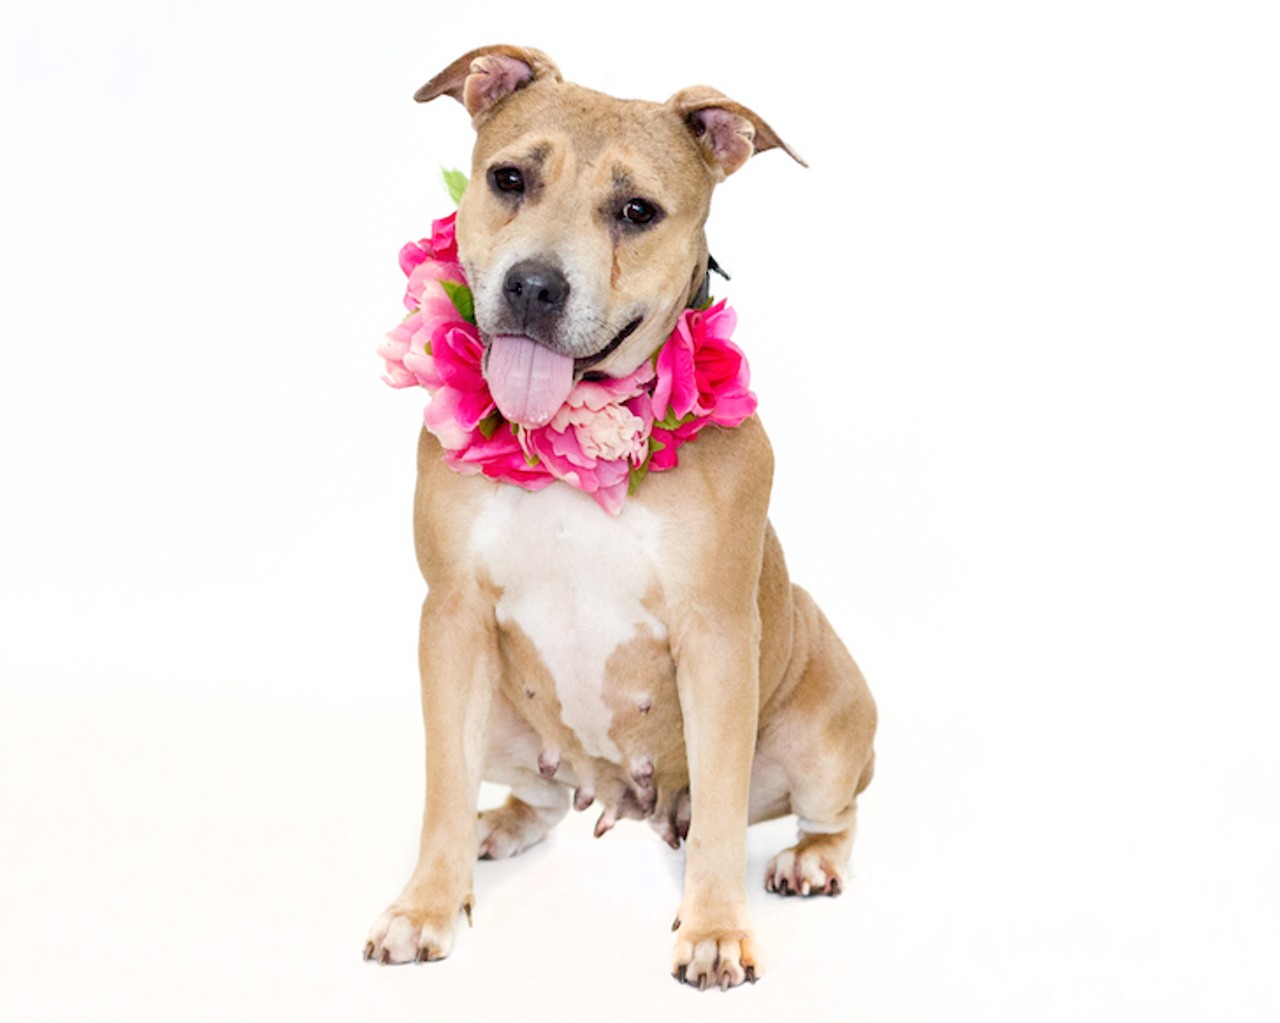 19 adoptable dogs looking for a good home in Orange County